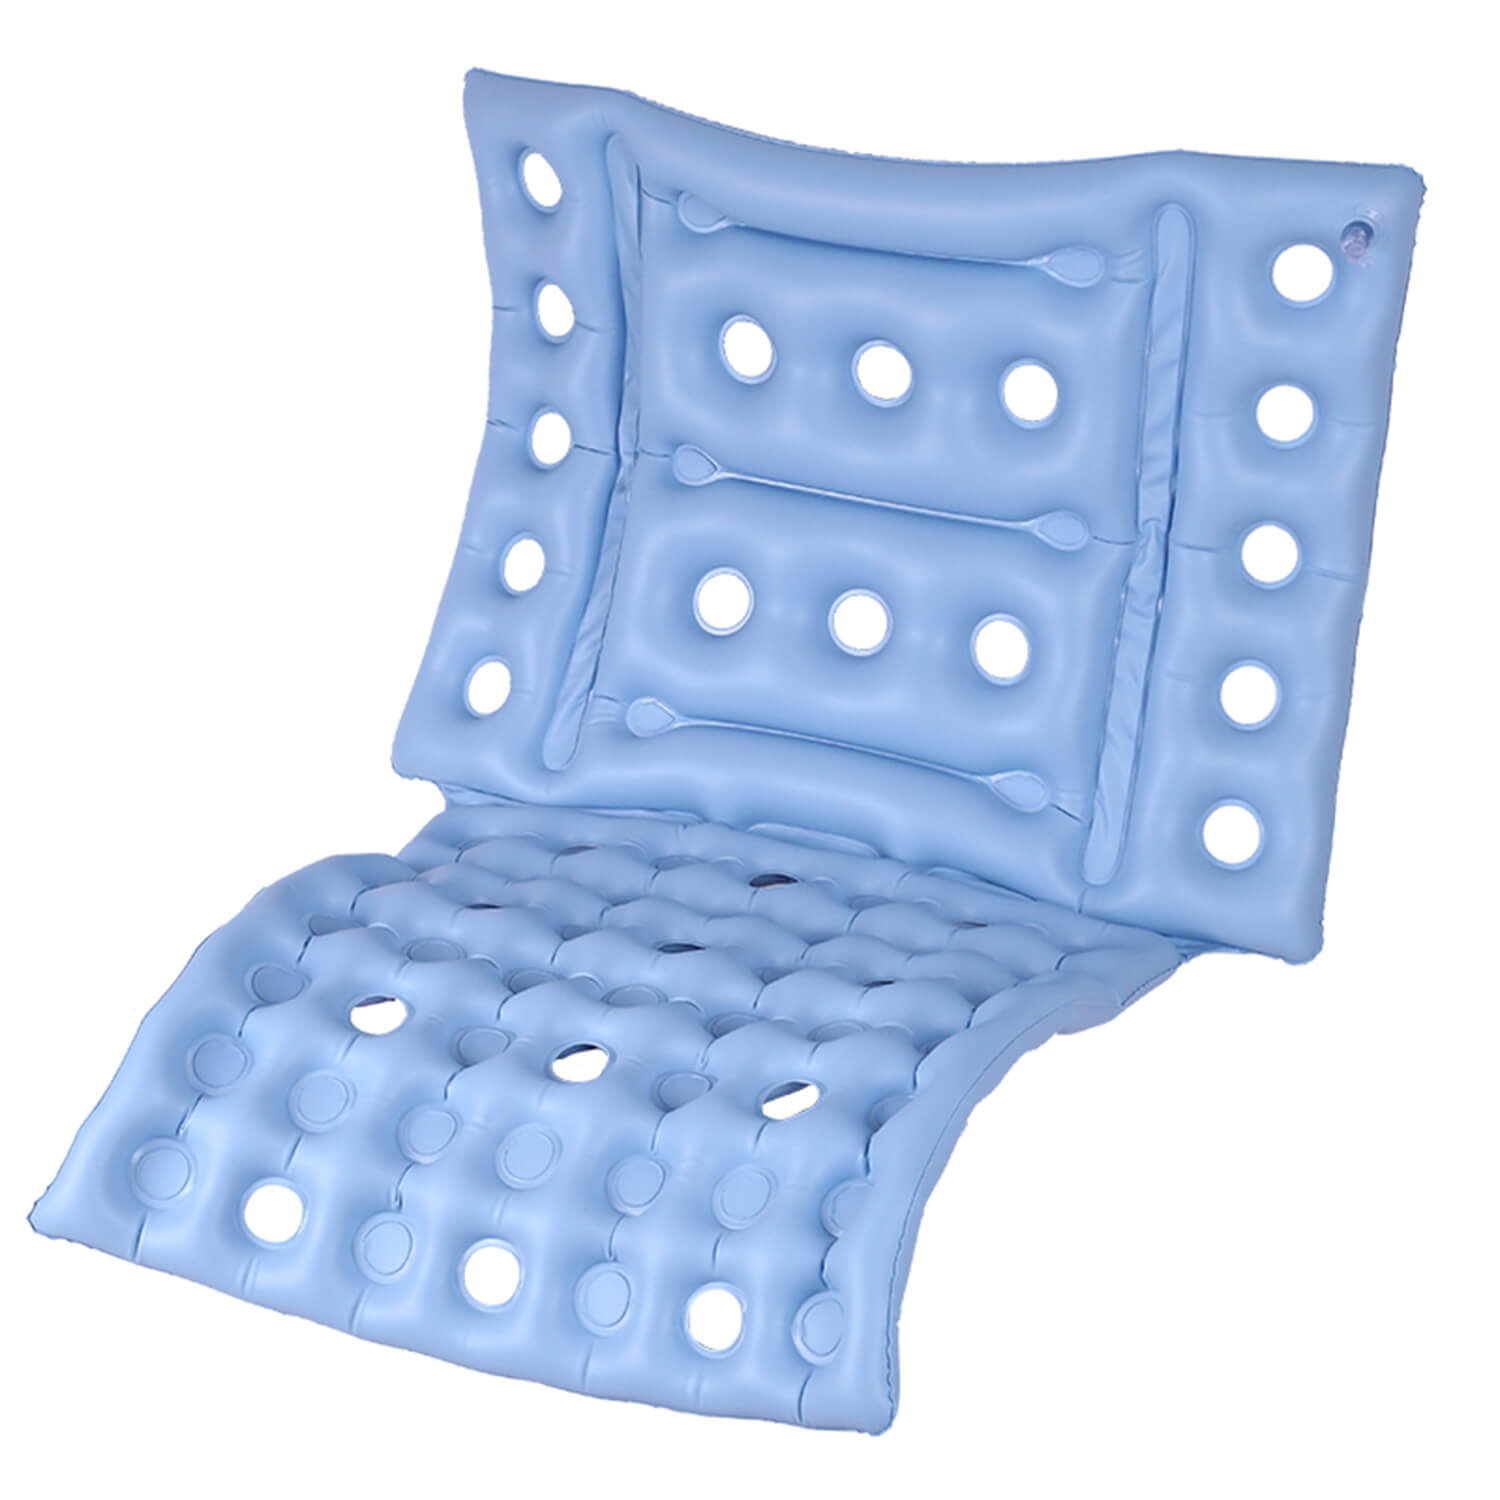 Air Cushion Seat, Inflatable Chair Pad Relax Prevent Bed Sores for